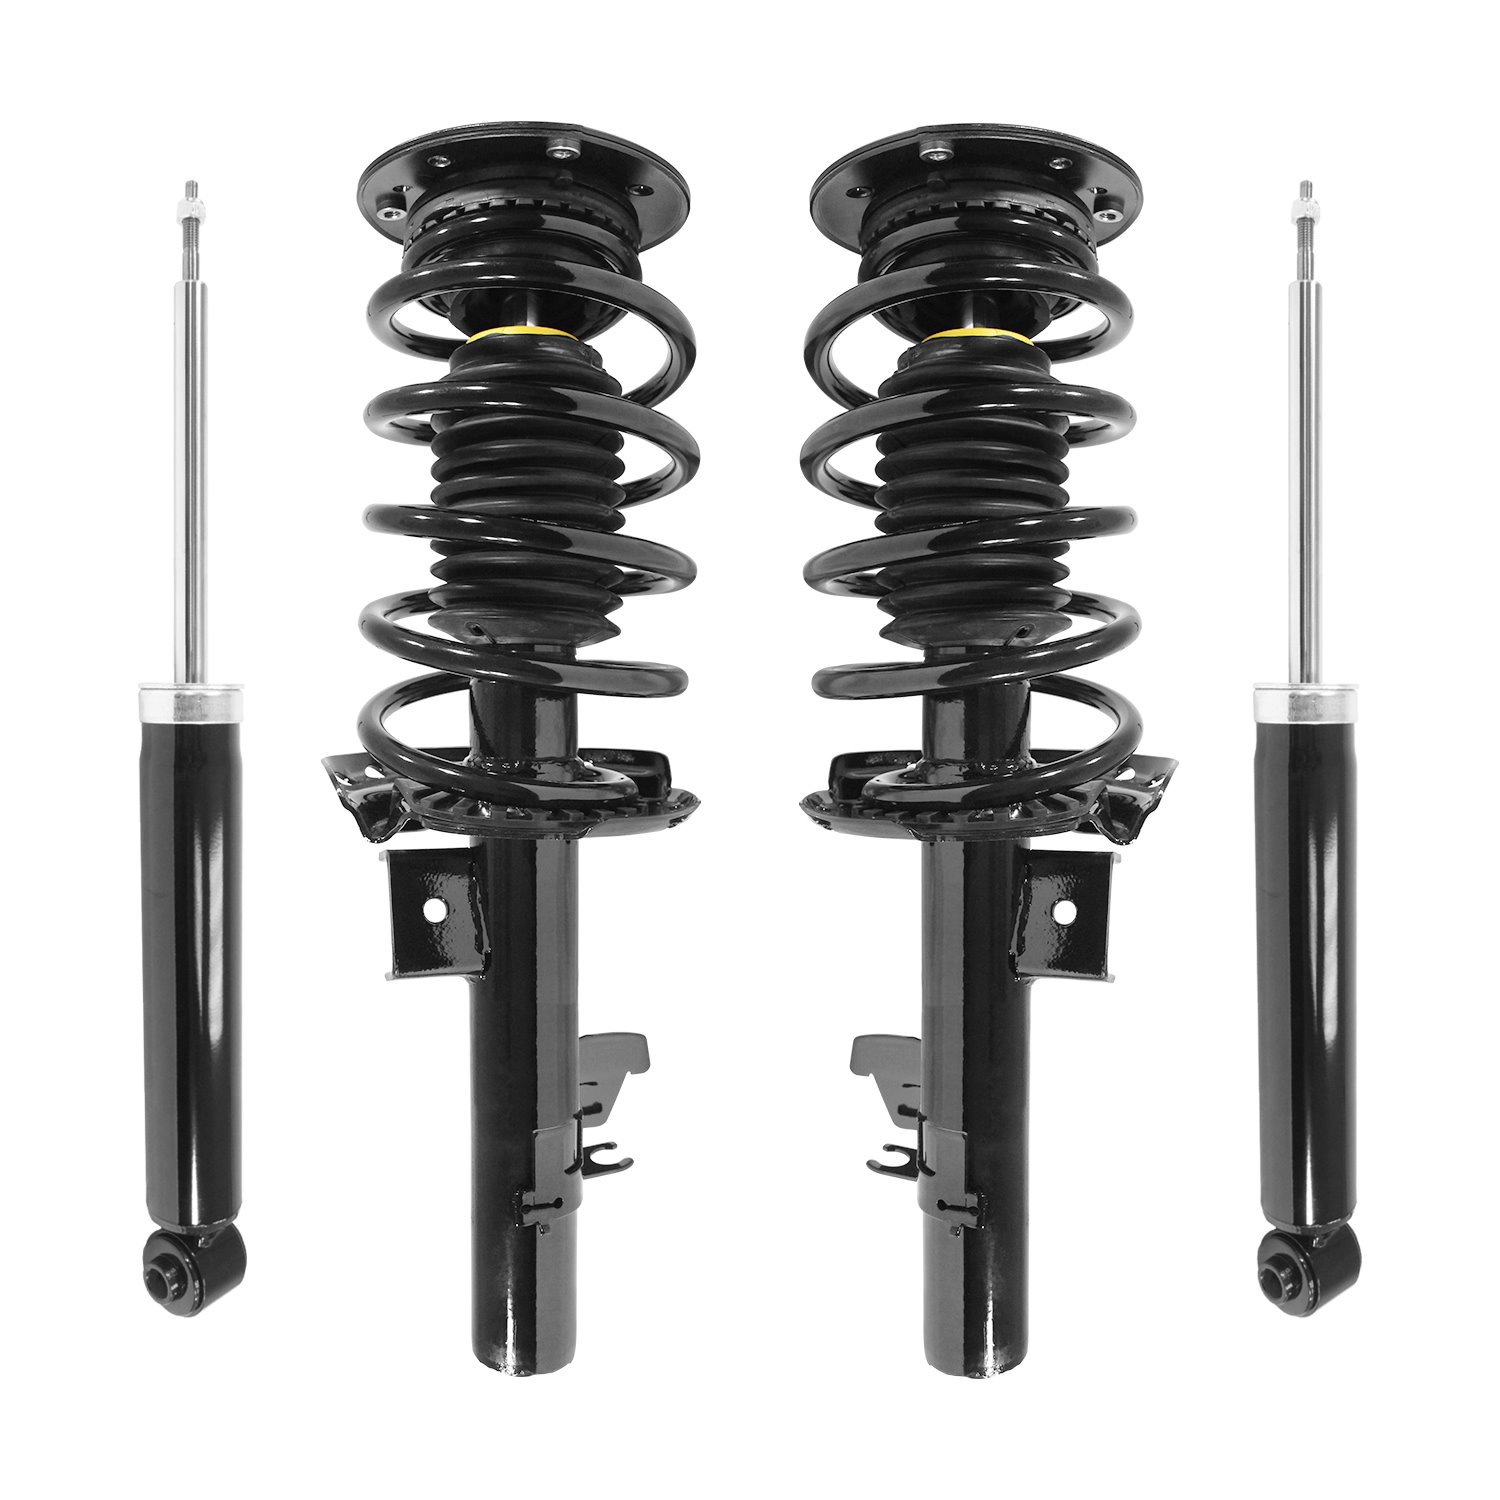 4-11493-259960-001 Front & Rear Suspension Strut & Coil Spring Assembly Fits Select Volvo V70, Volvo XC70